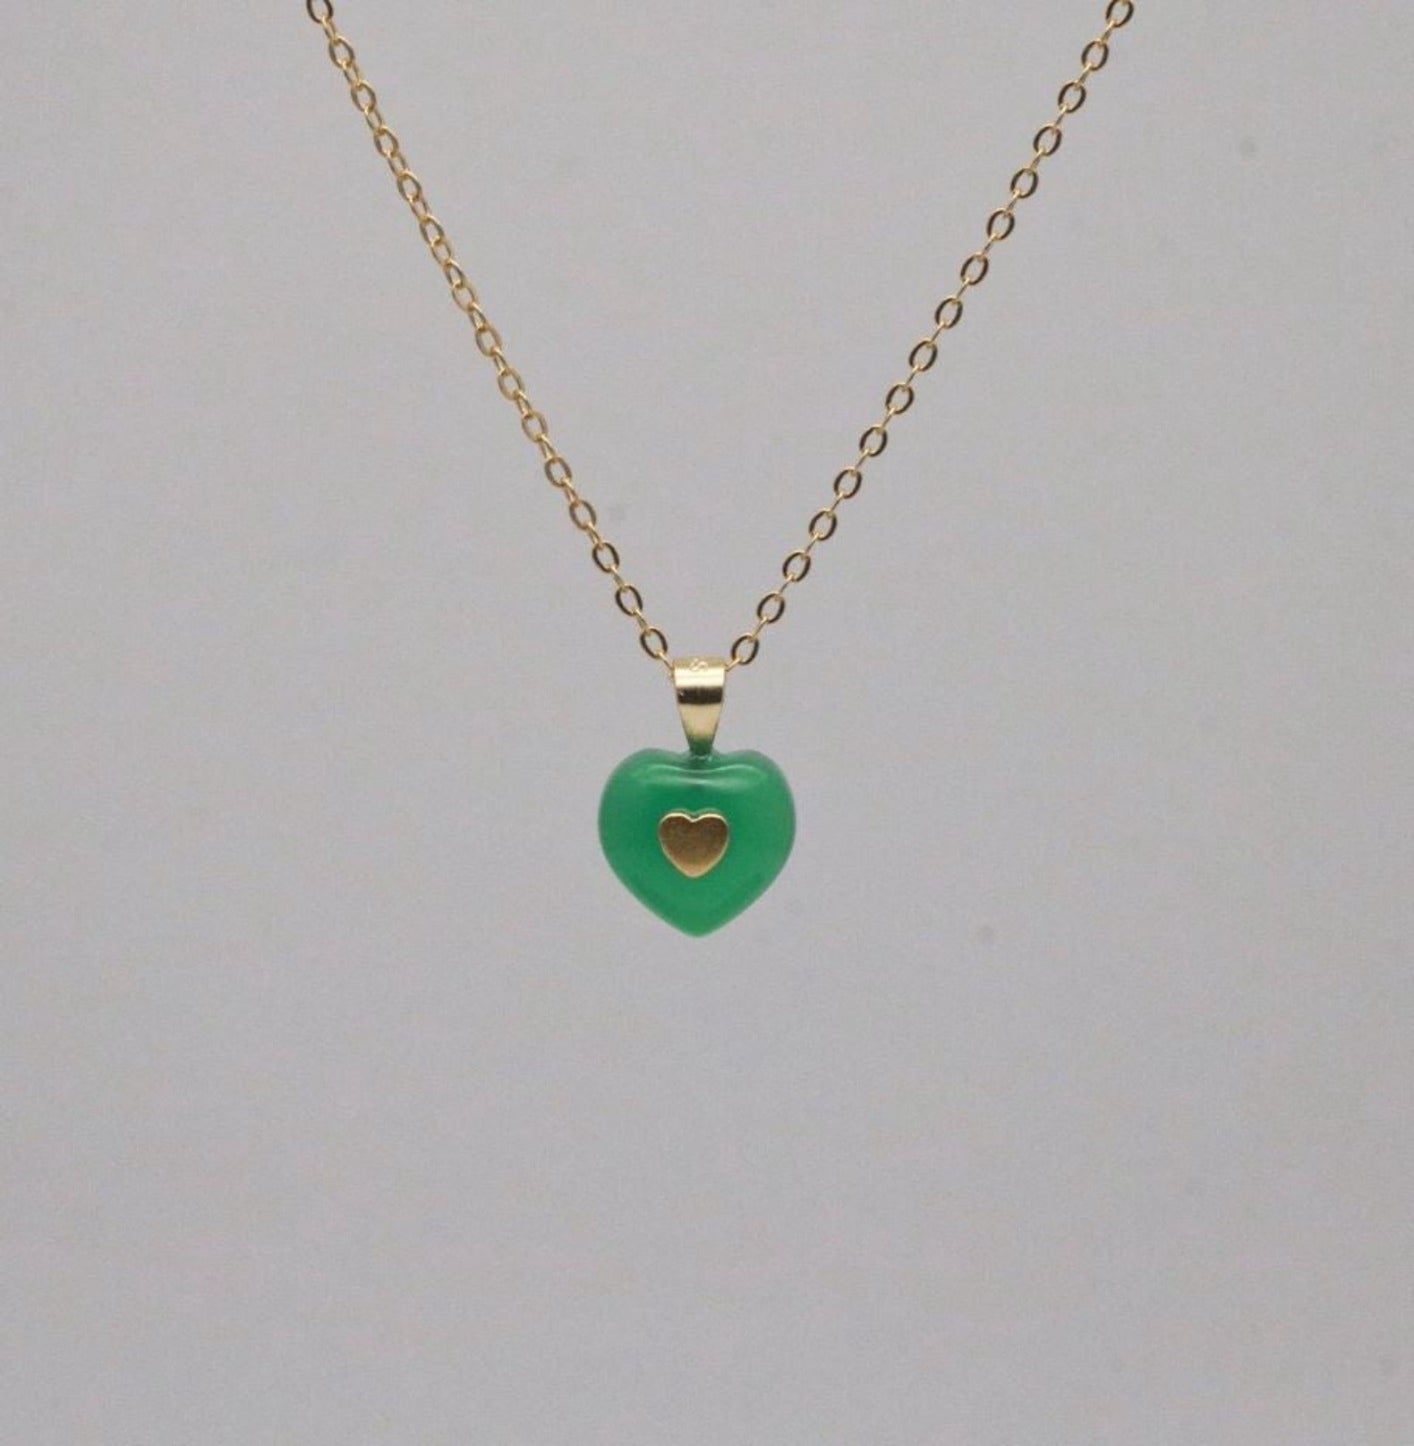 JADE HEART NECKLACE neck Yubama Jewelry Online Store - The Elegant Designs of Gold and Silver ! 